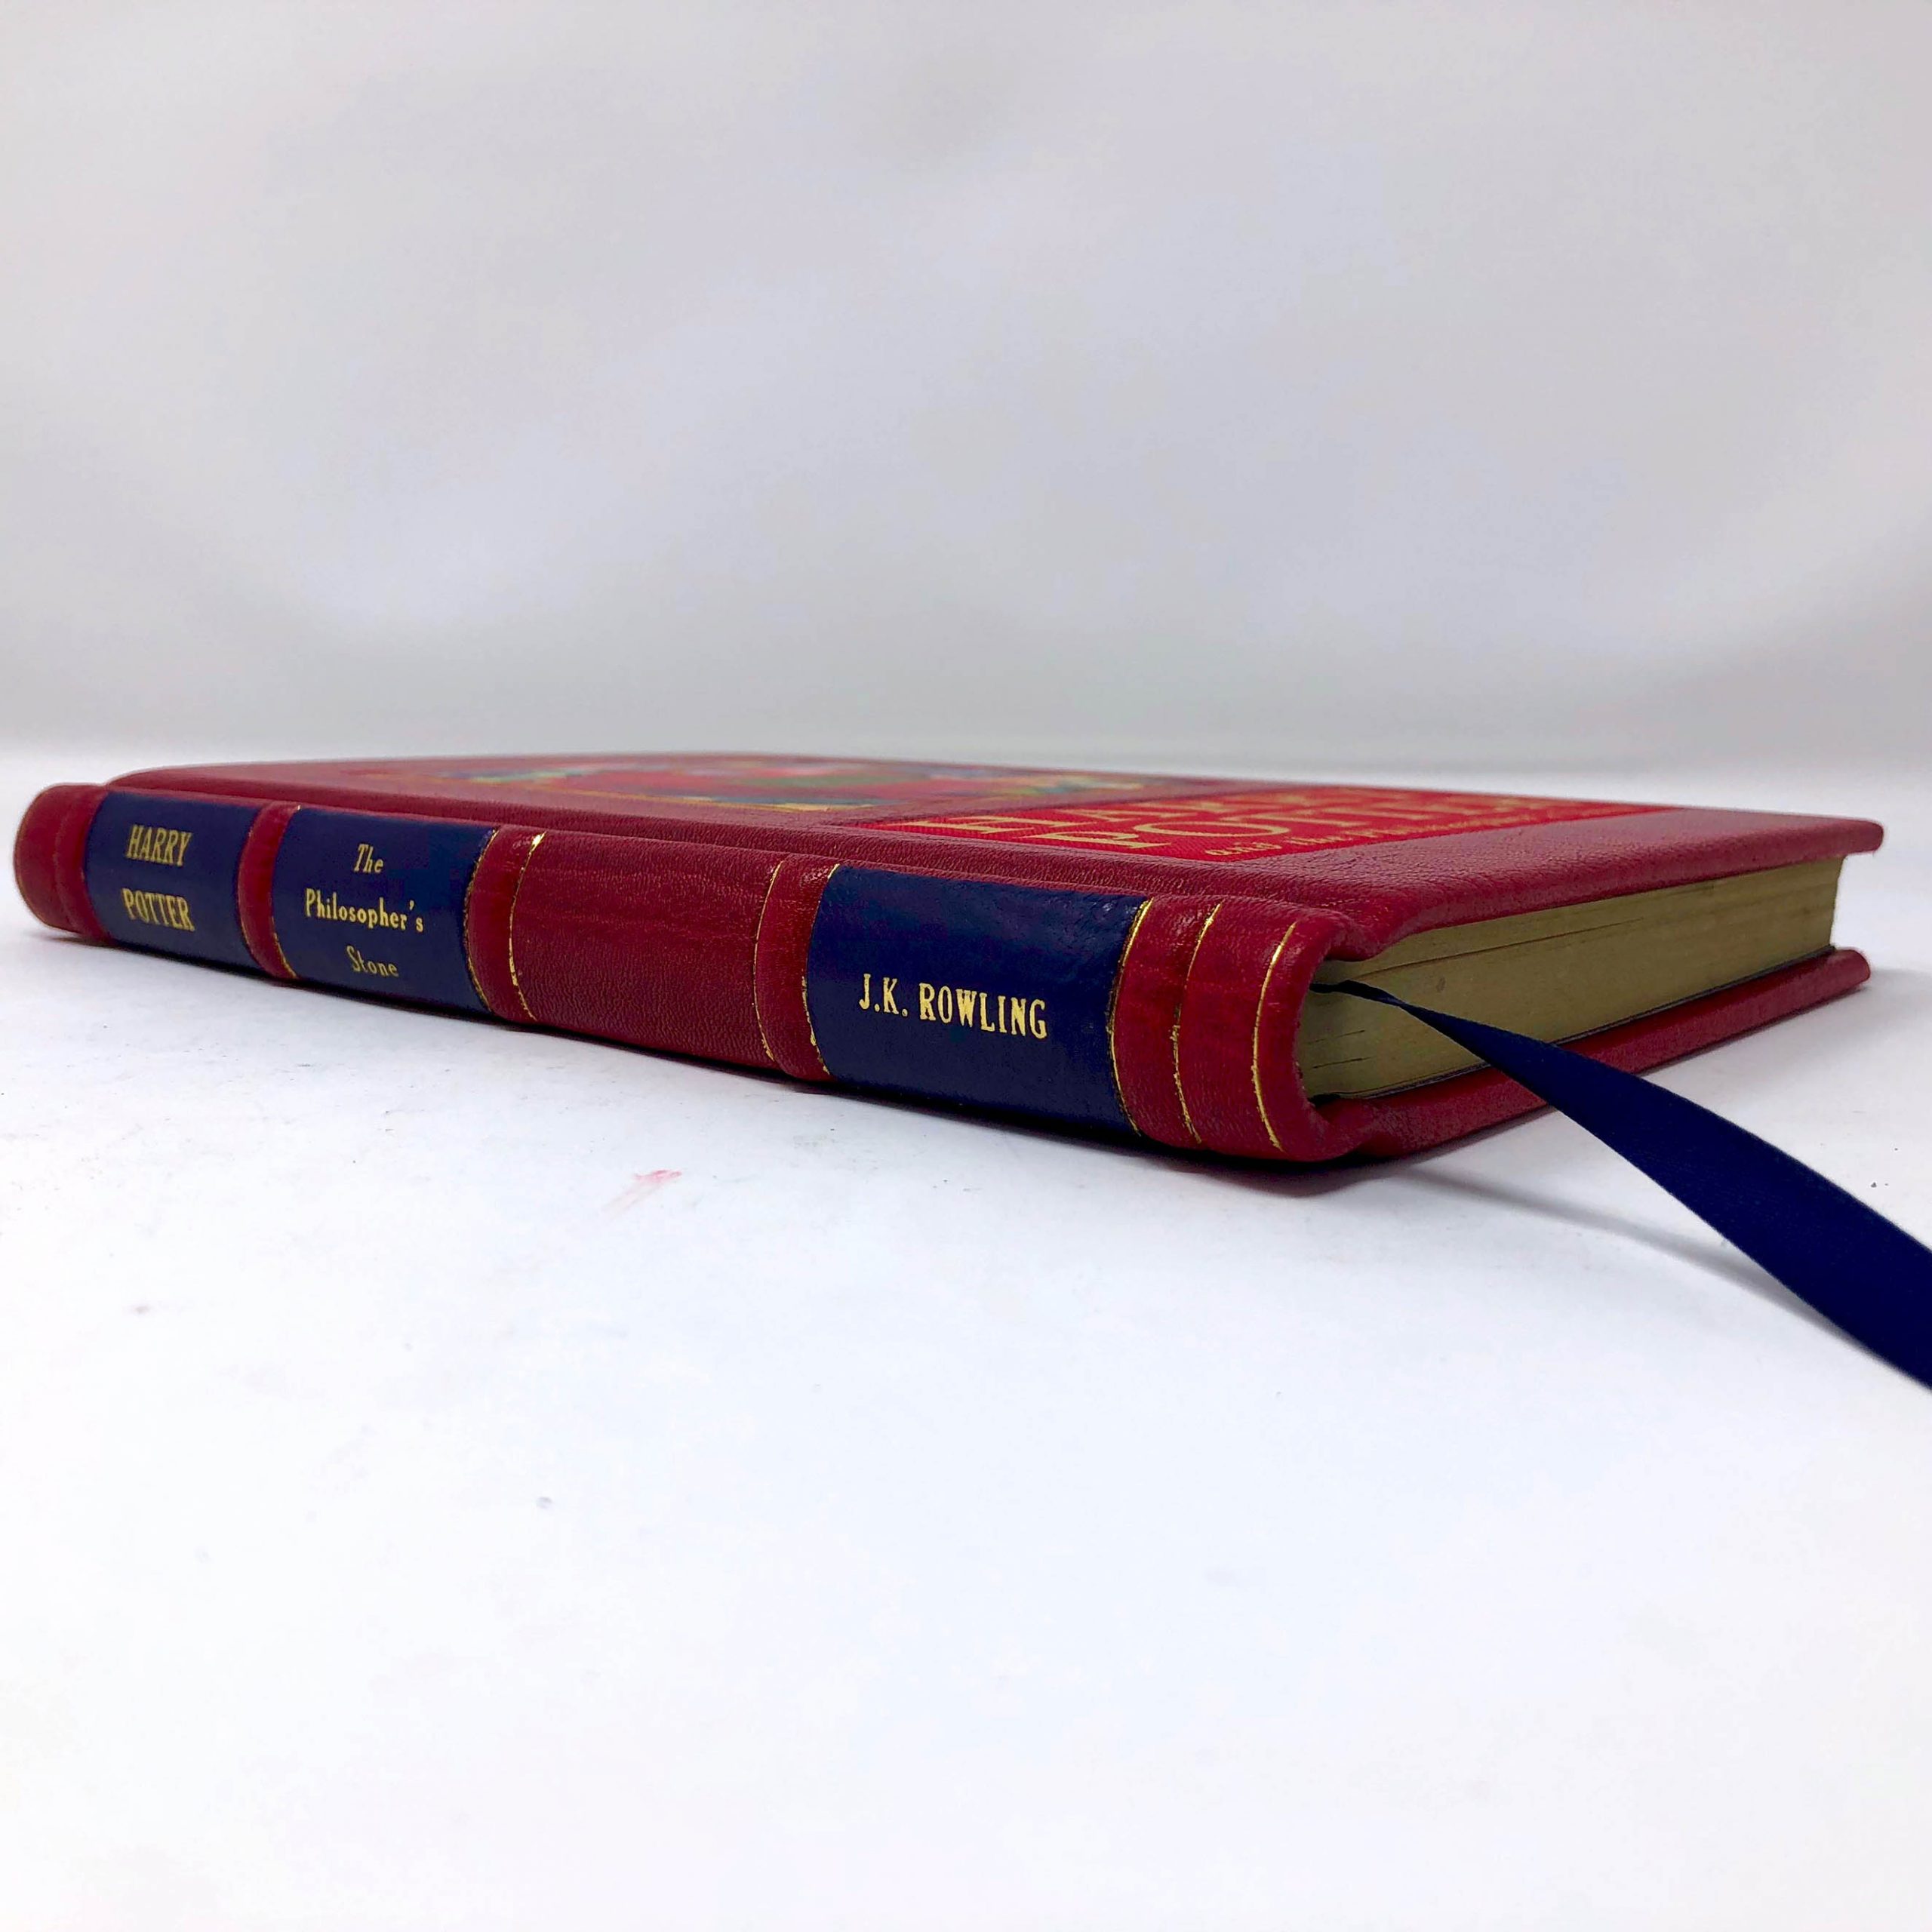 Harry Potter and The Philosopher’s Stone | UK First Edition
Custom Leather Book
Boston Harbor Bookbindery